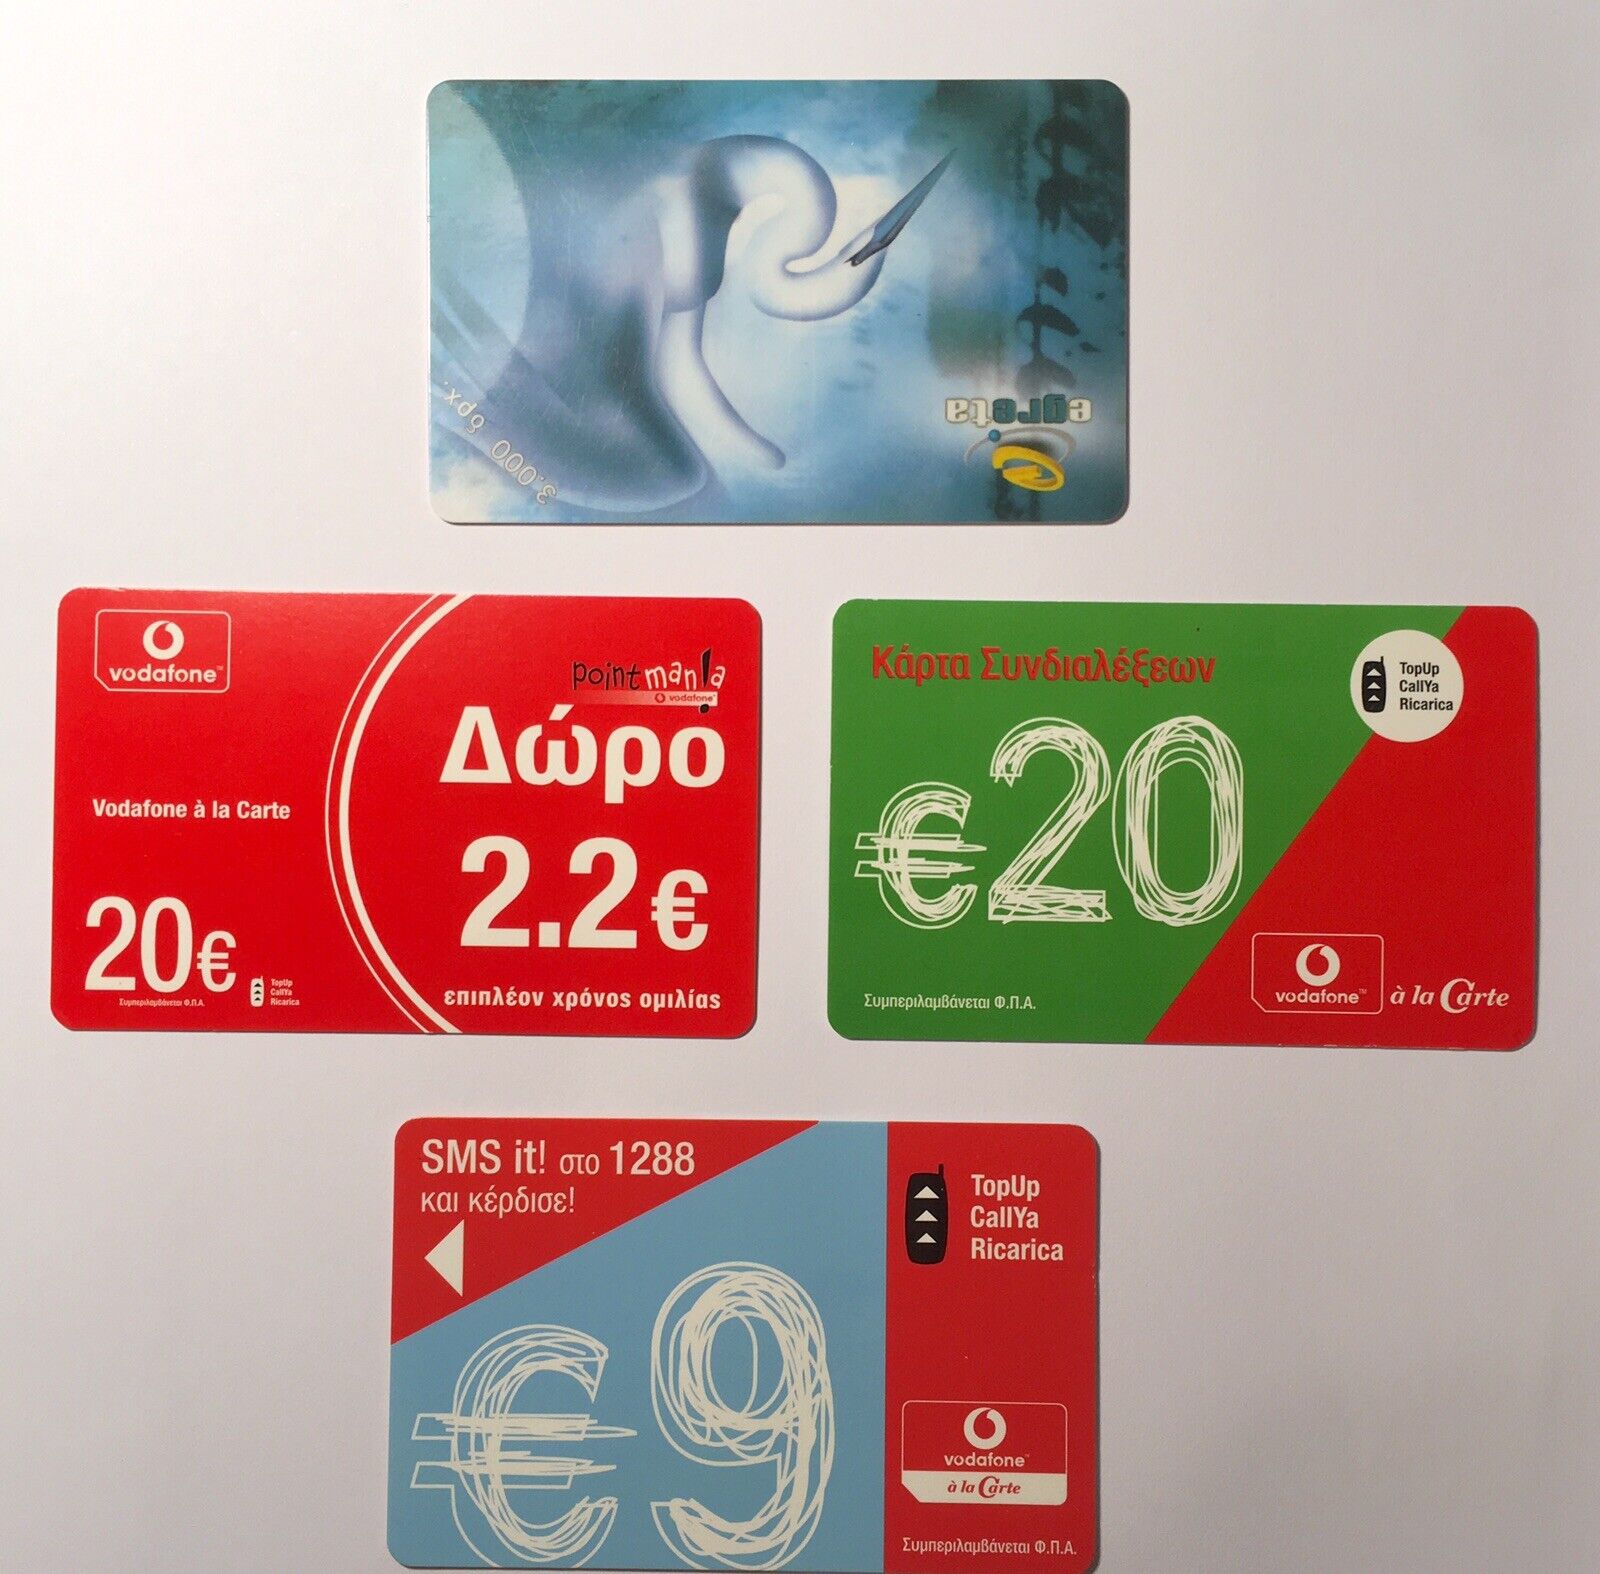 Greece 4 Phone-cards Used - 3 Mobile Top Up Cards & 1 Credit Calling Card.